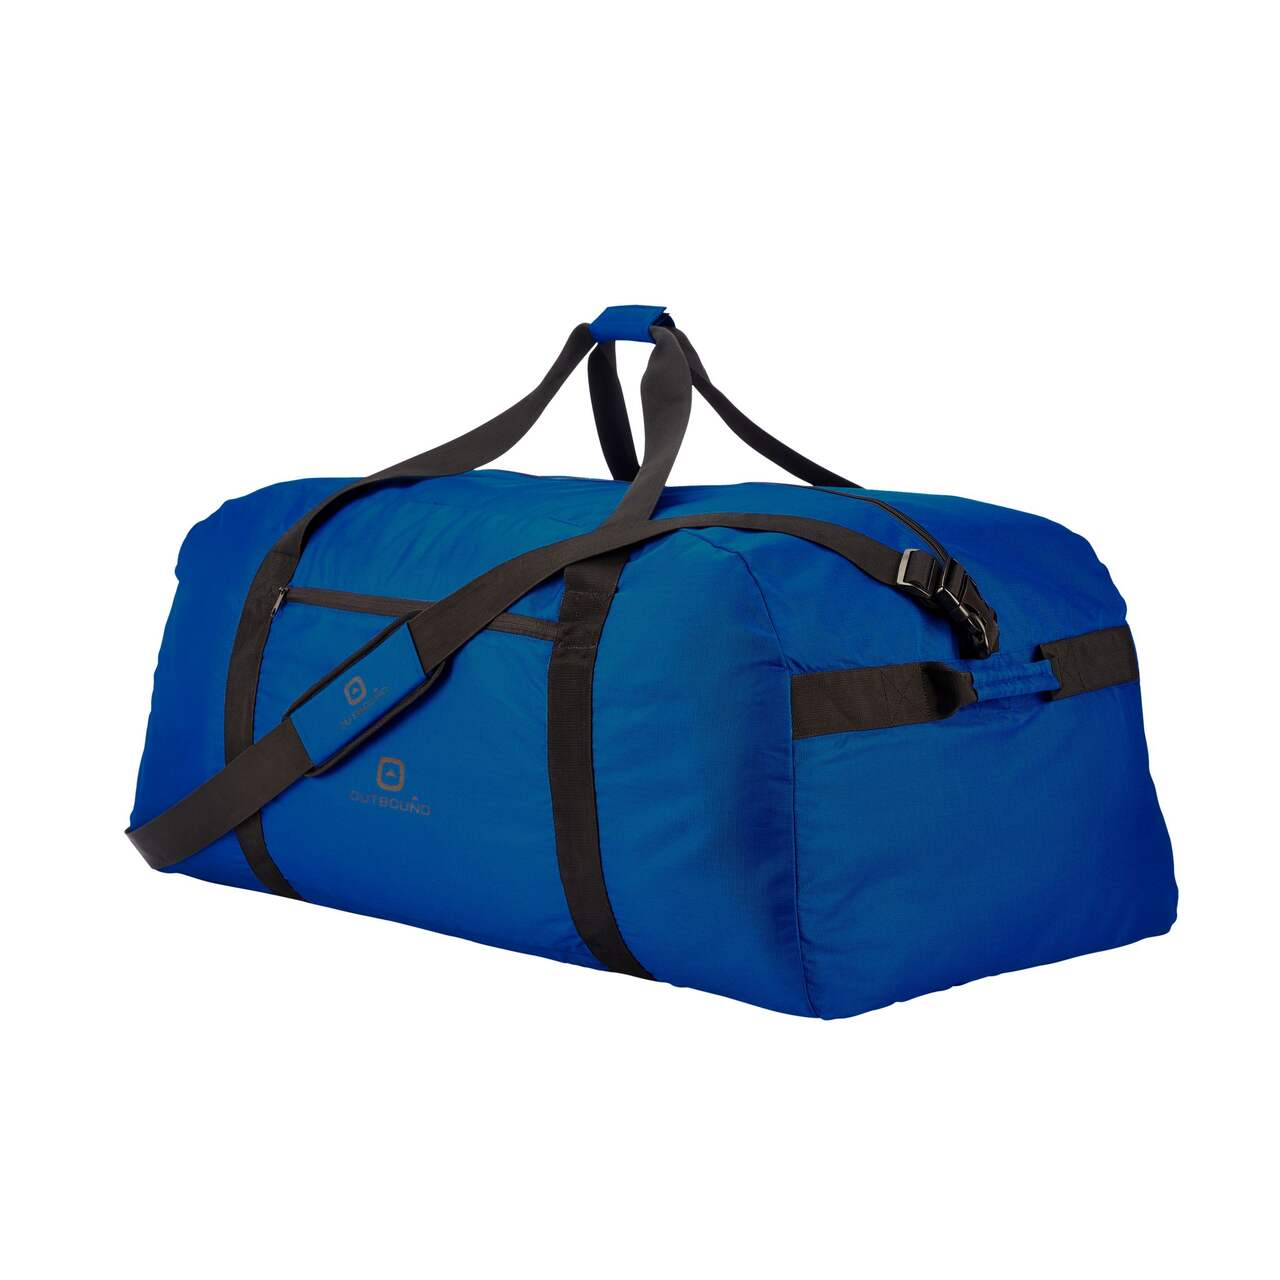 Outbound Self-Packable Weekender Overnight Travel Duffle Bag w/ Padded  Shoulder Strap, 180-L